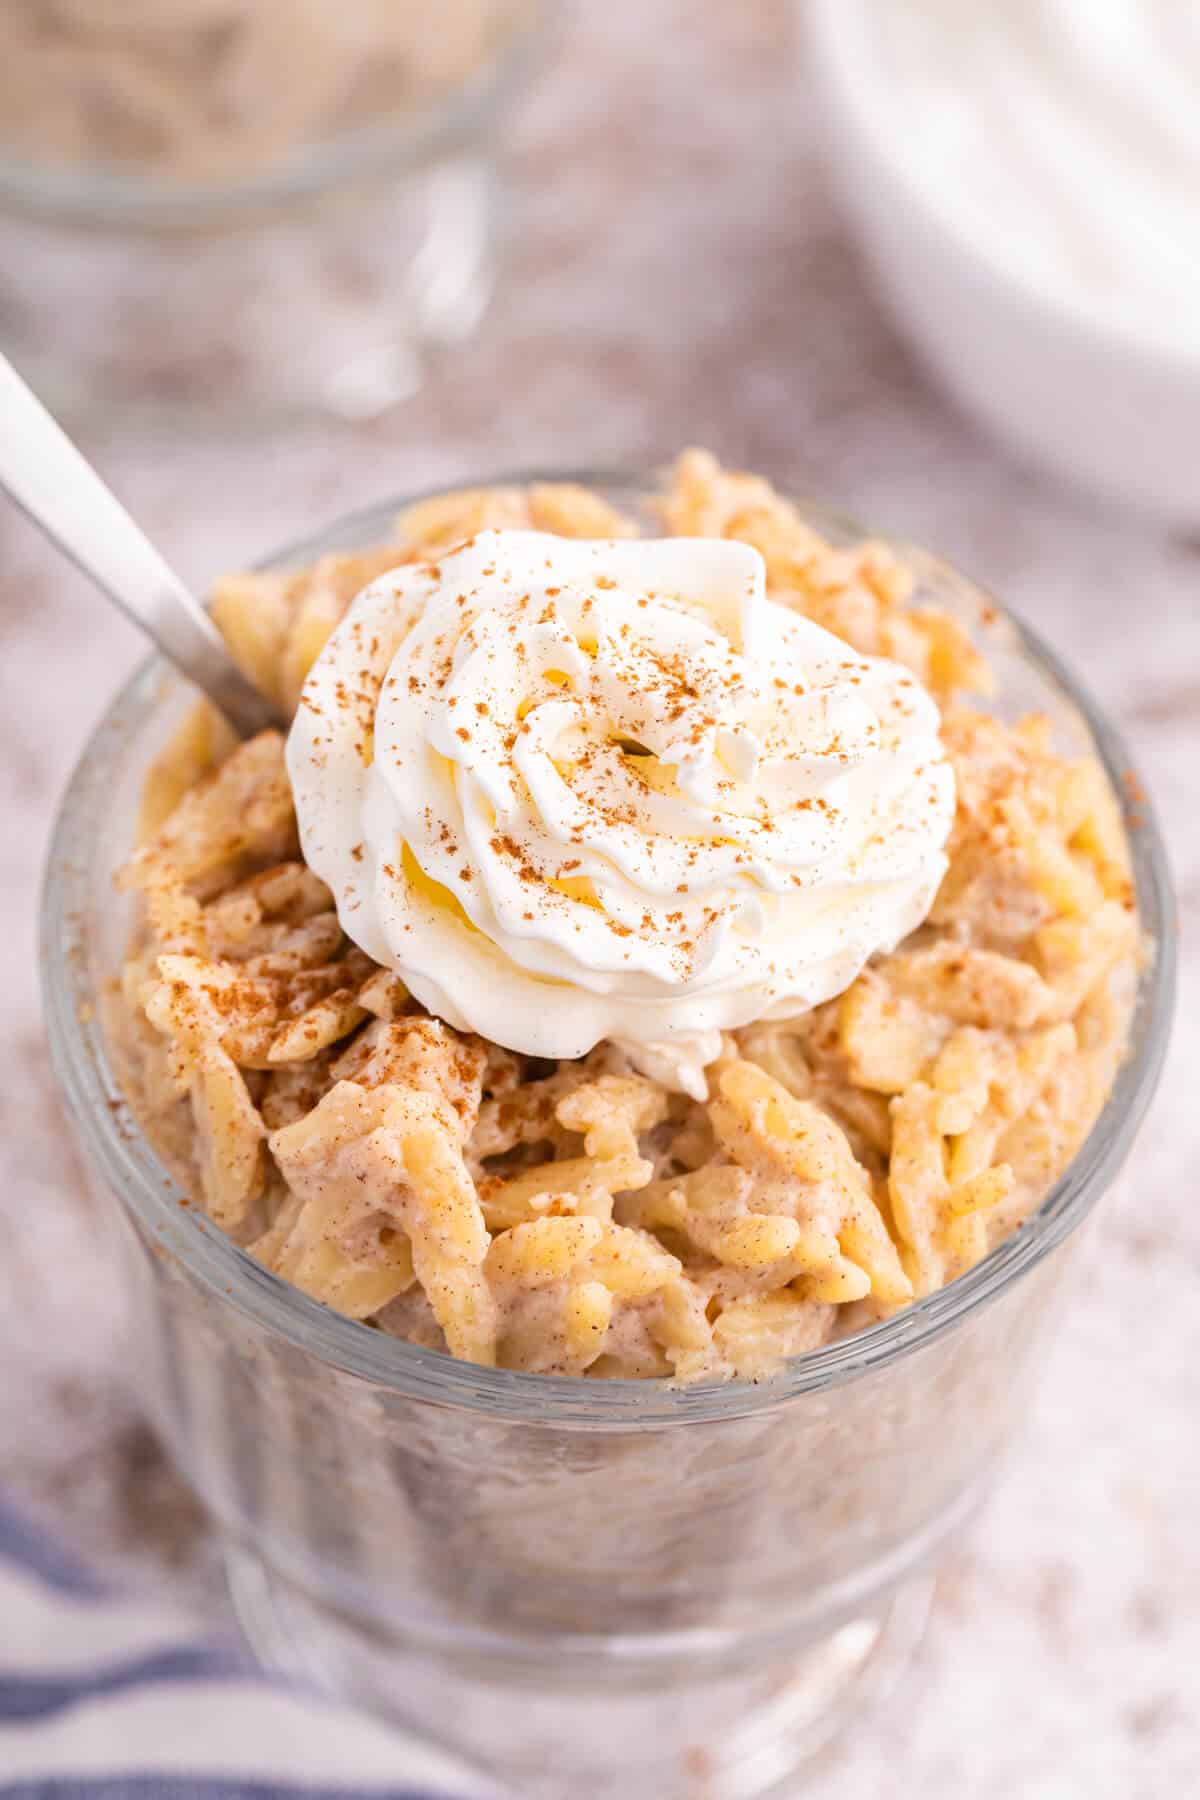 Orzo pudding topped with whipped cream in a parfait dish with a spoon.